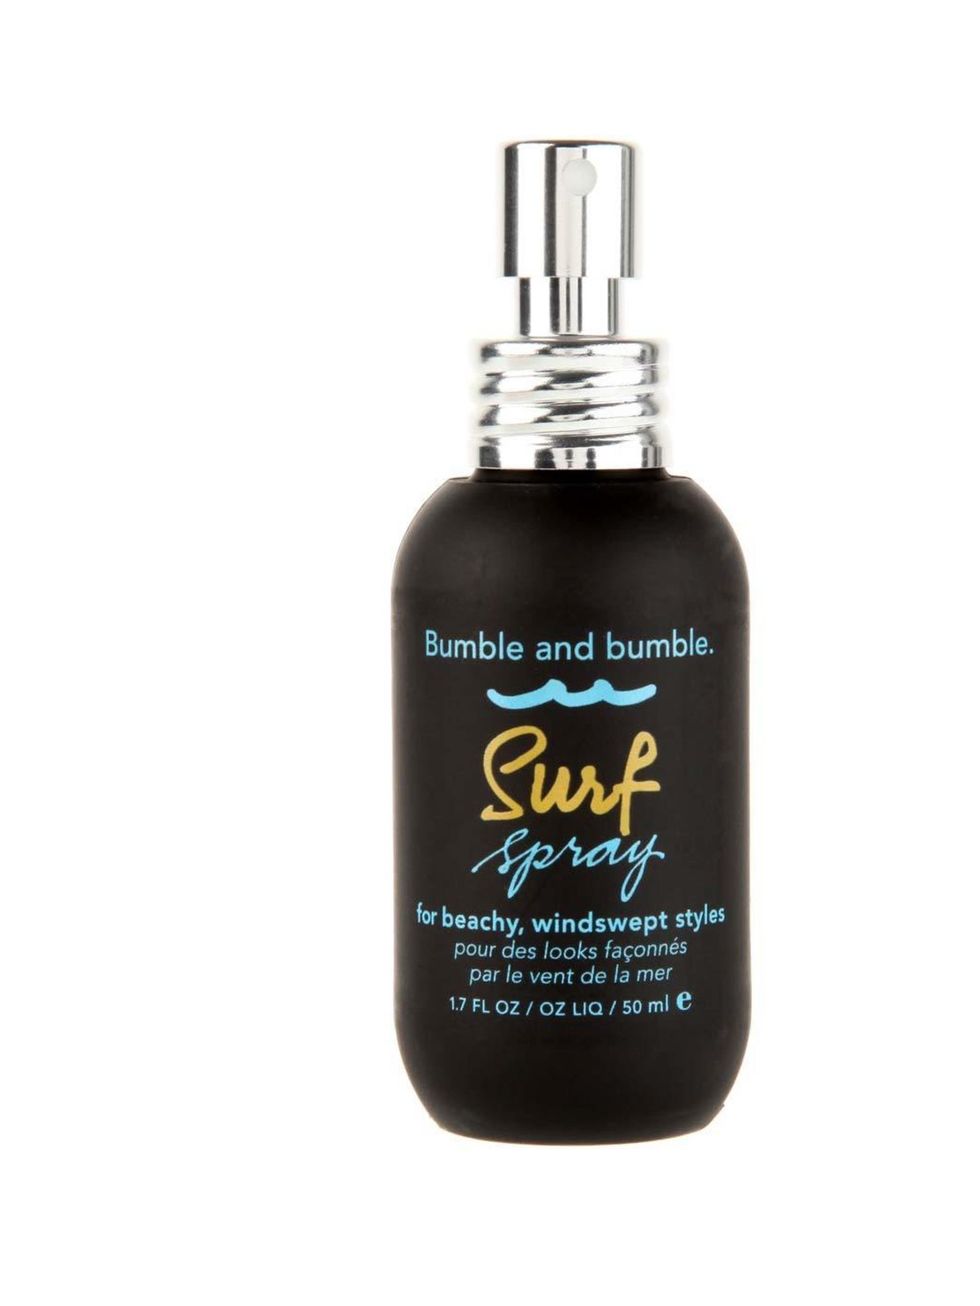 <p><a href="http://www.bumbleandbumble.co.uk/product/72/221/Products/Styling/Speciality/surf-spray/index.tmpl">Bumble and Bumble Surf Spray, £20.50</a></p><p>The hairstylists favourite, the original and yes, still the best. To add an instant <a href="http